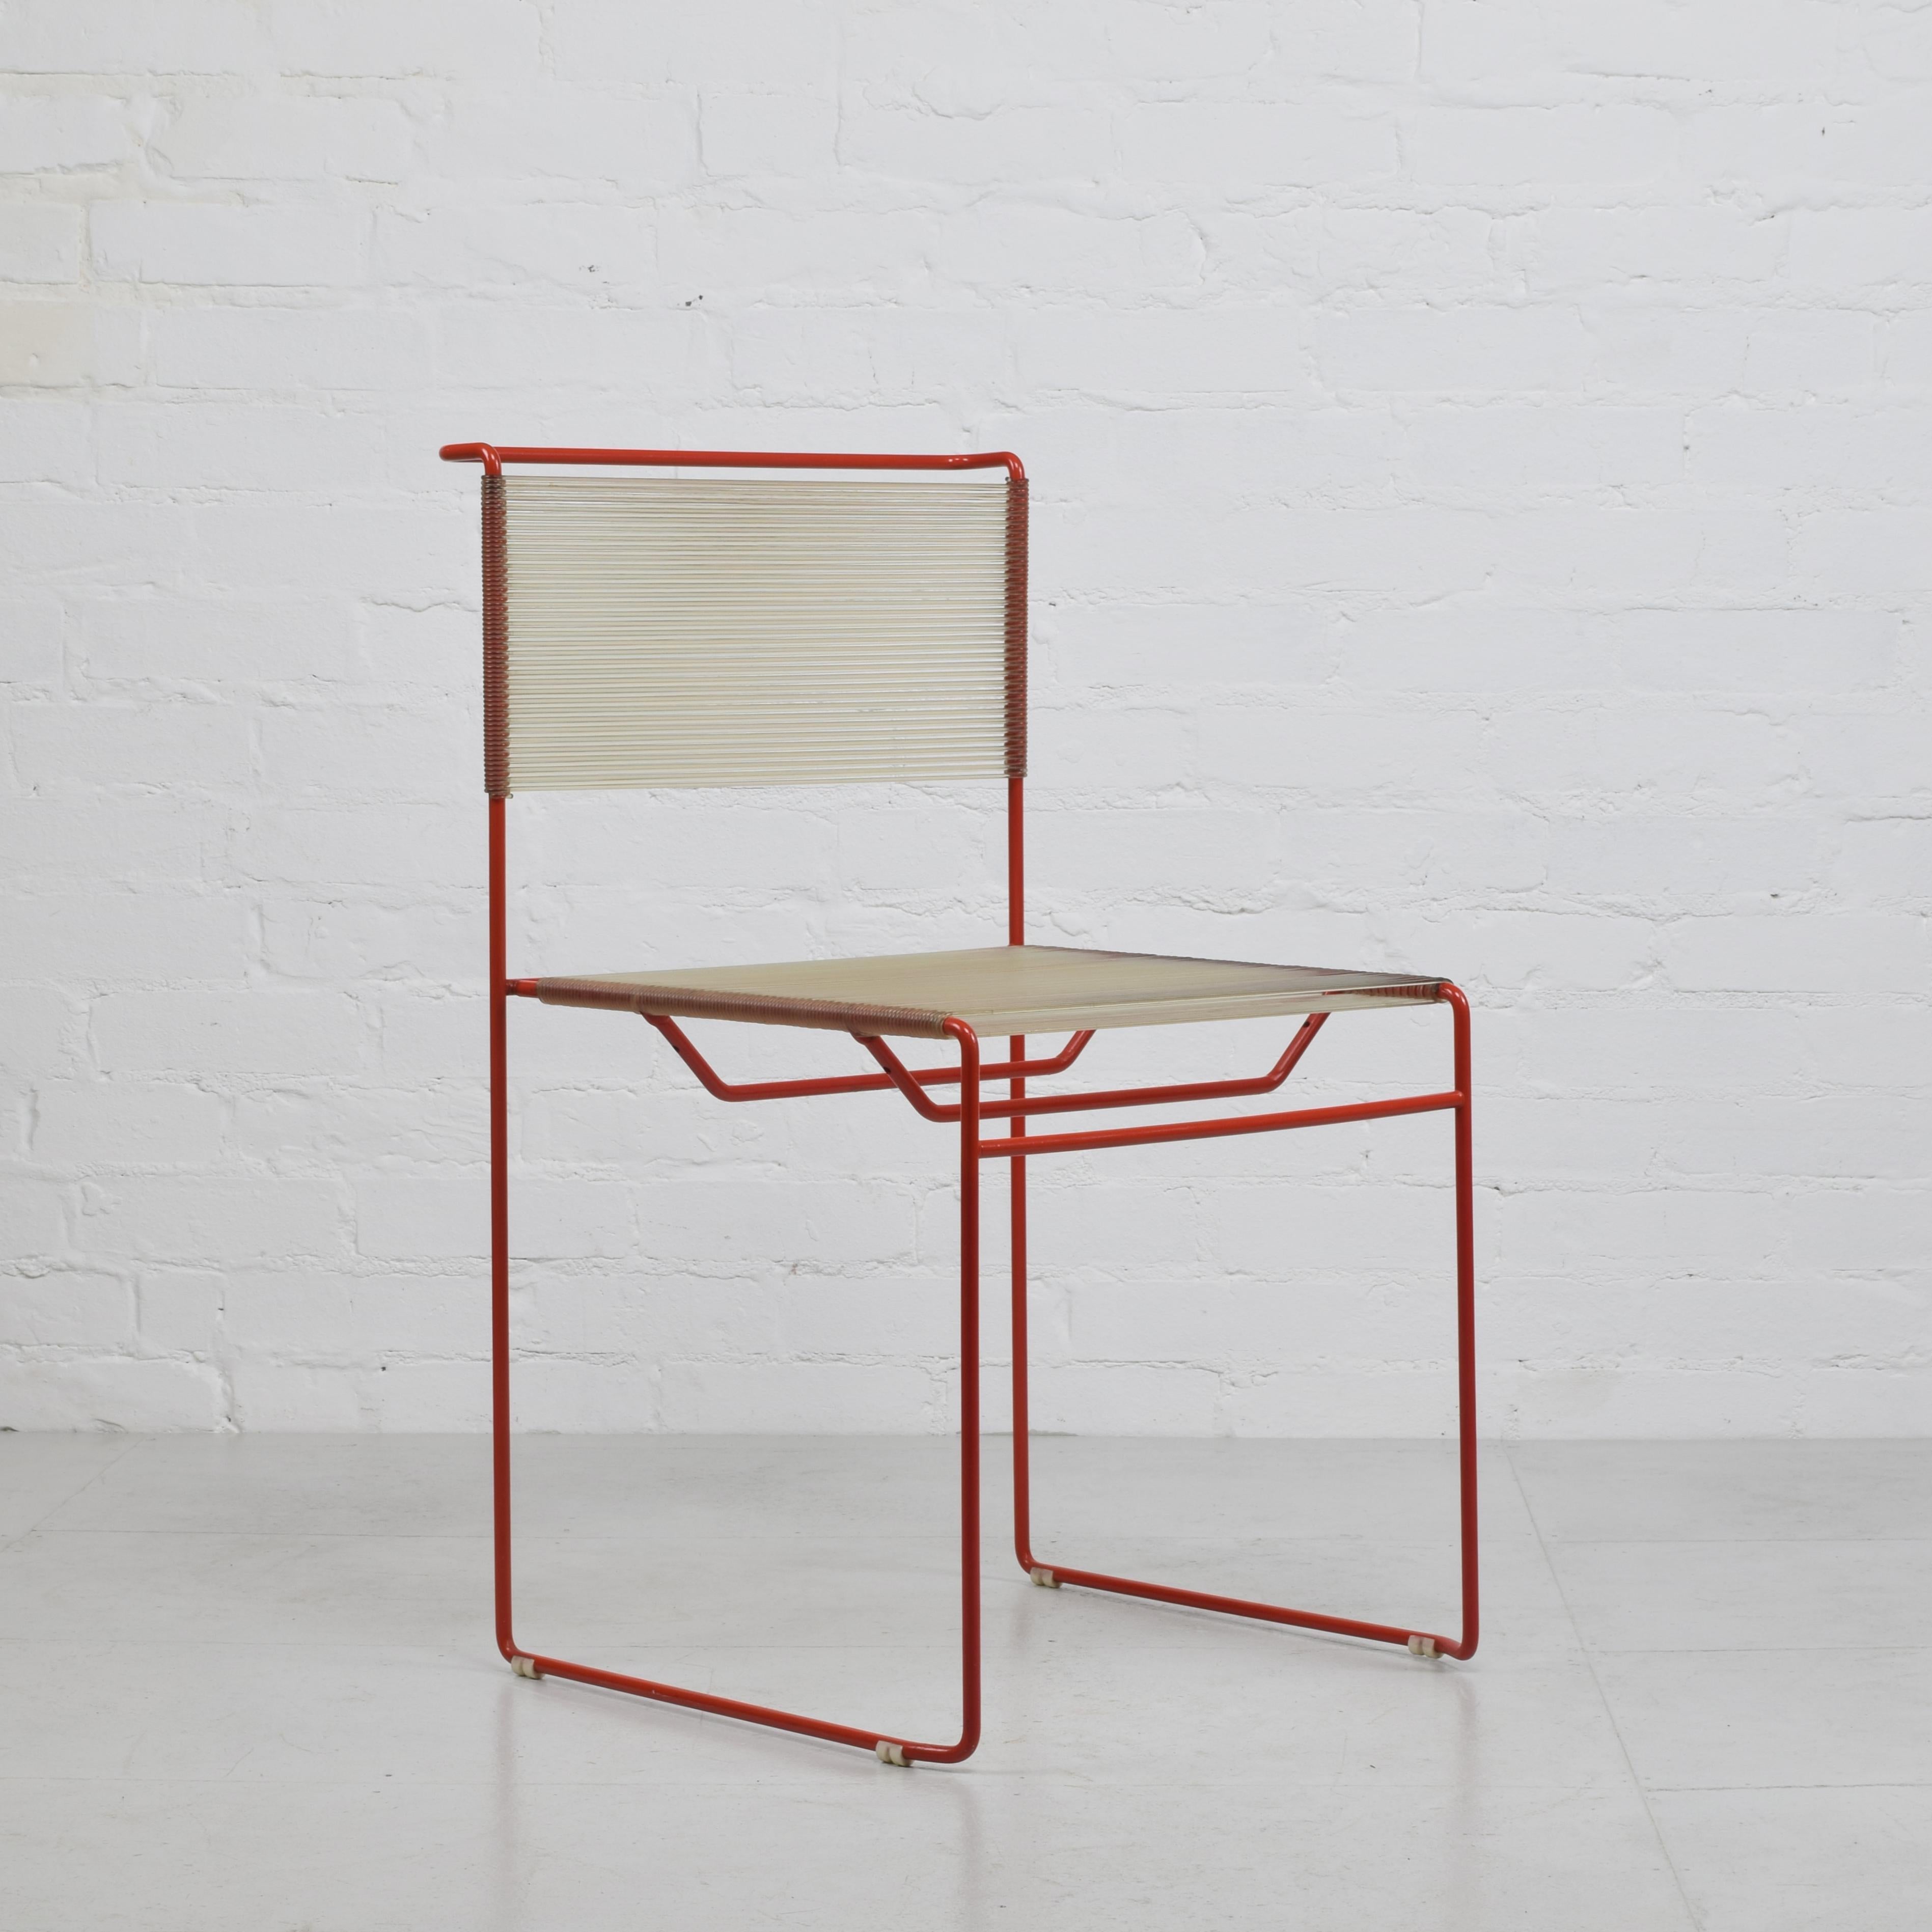 Giandomenico Belotti for CMP Padova, Italy c. 1970
‘Fly Line’ dining or side chair

Red metal frame with transparent tinted plastic cord seat and back. Original plastic floor glides. Manufacturer’s label to frame.

(please note: we also have